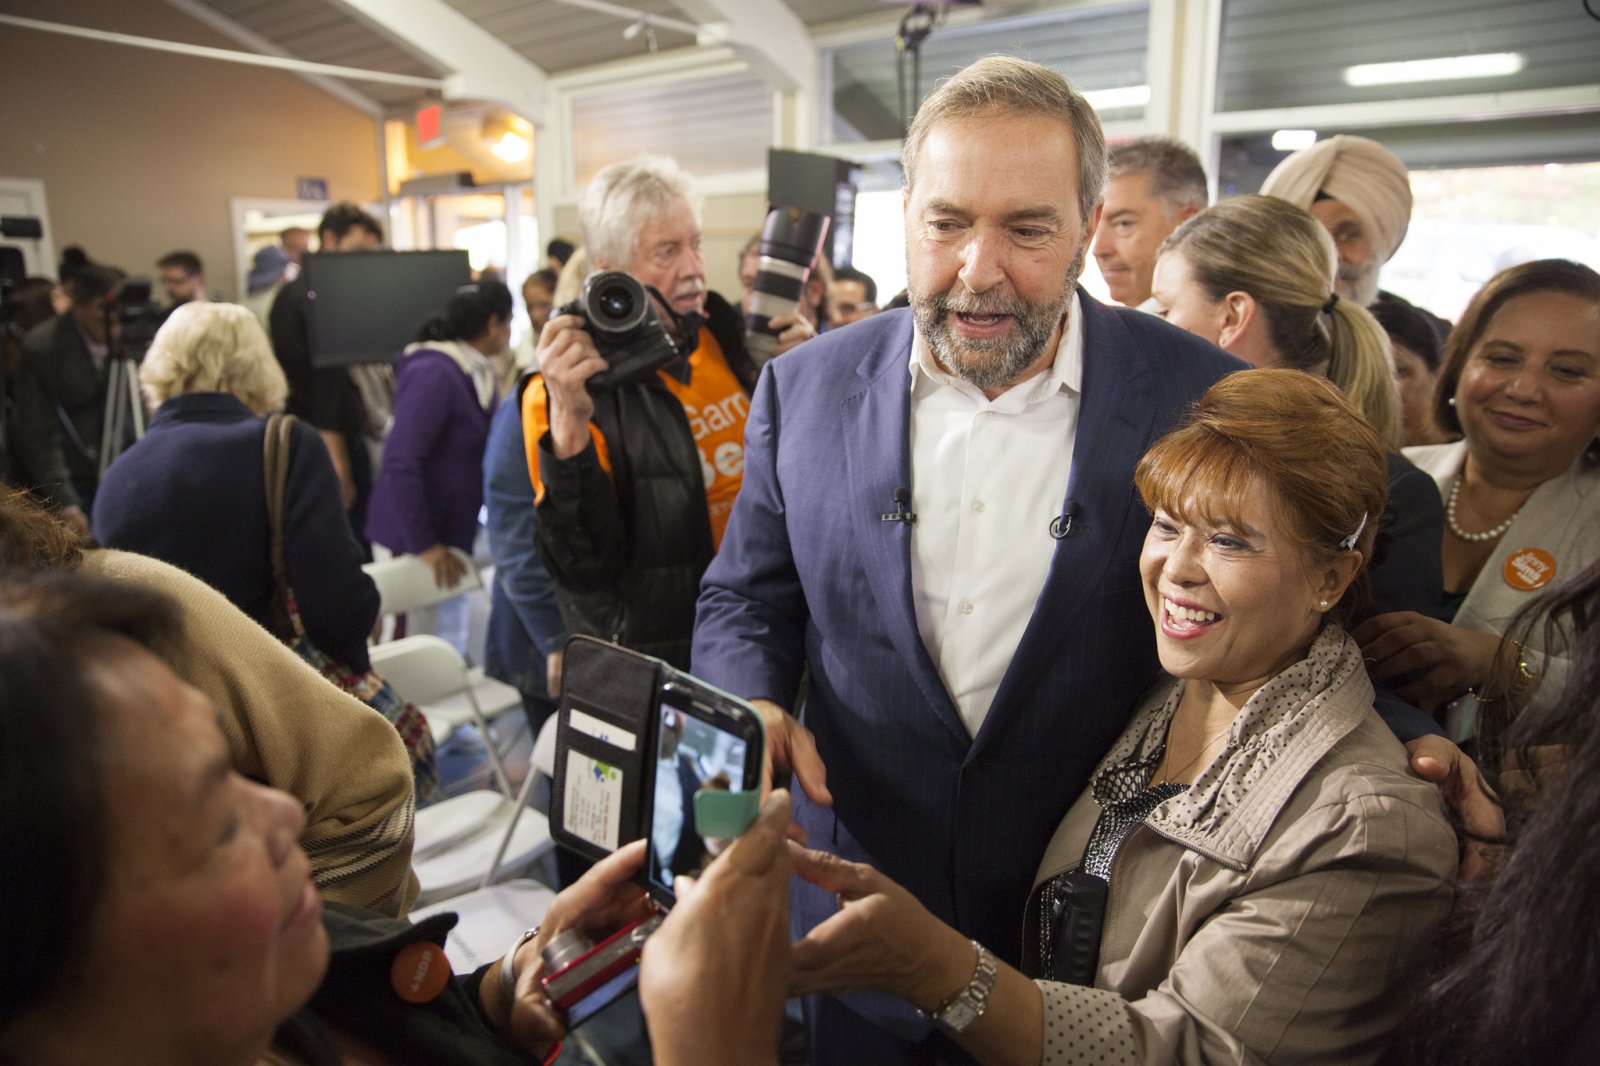 Tom Mulcair and supporter taking photo at NDP rally in Surrey BC - Mychaylo Prystupa